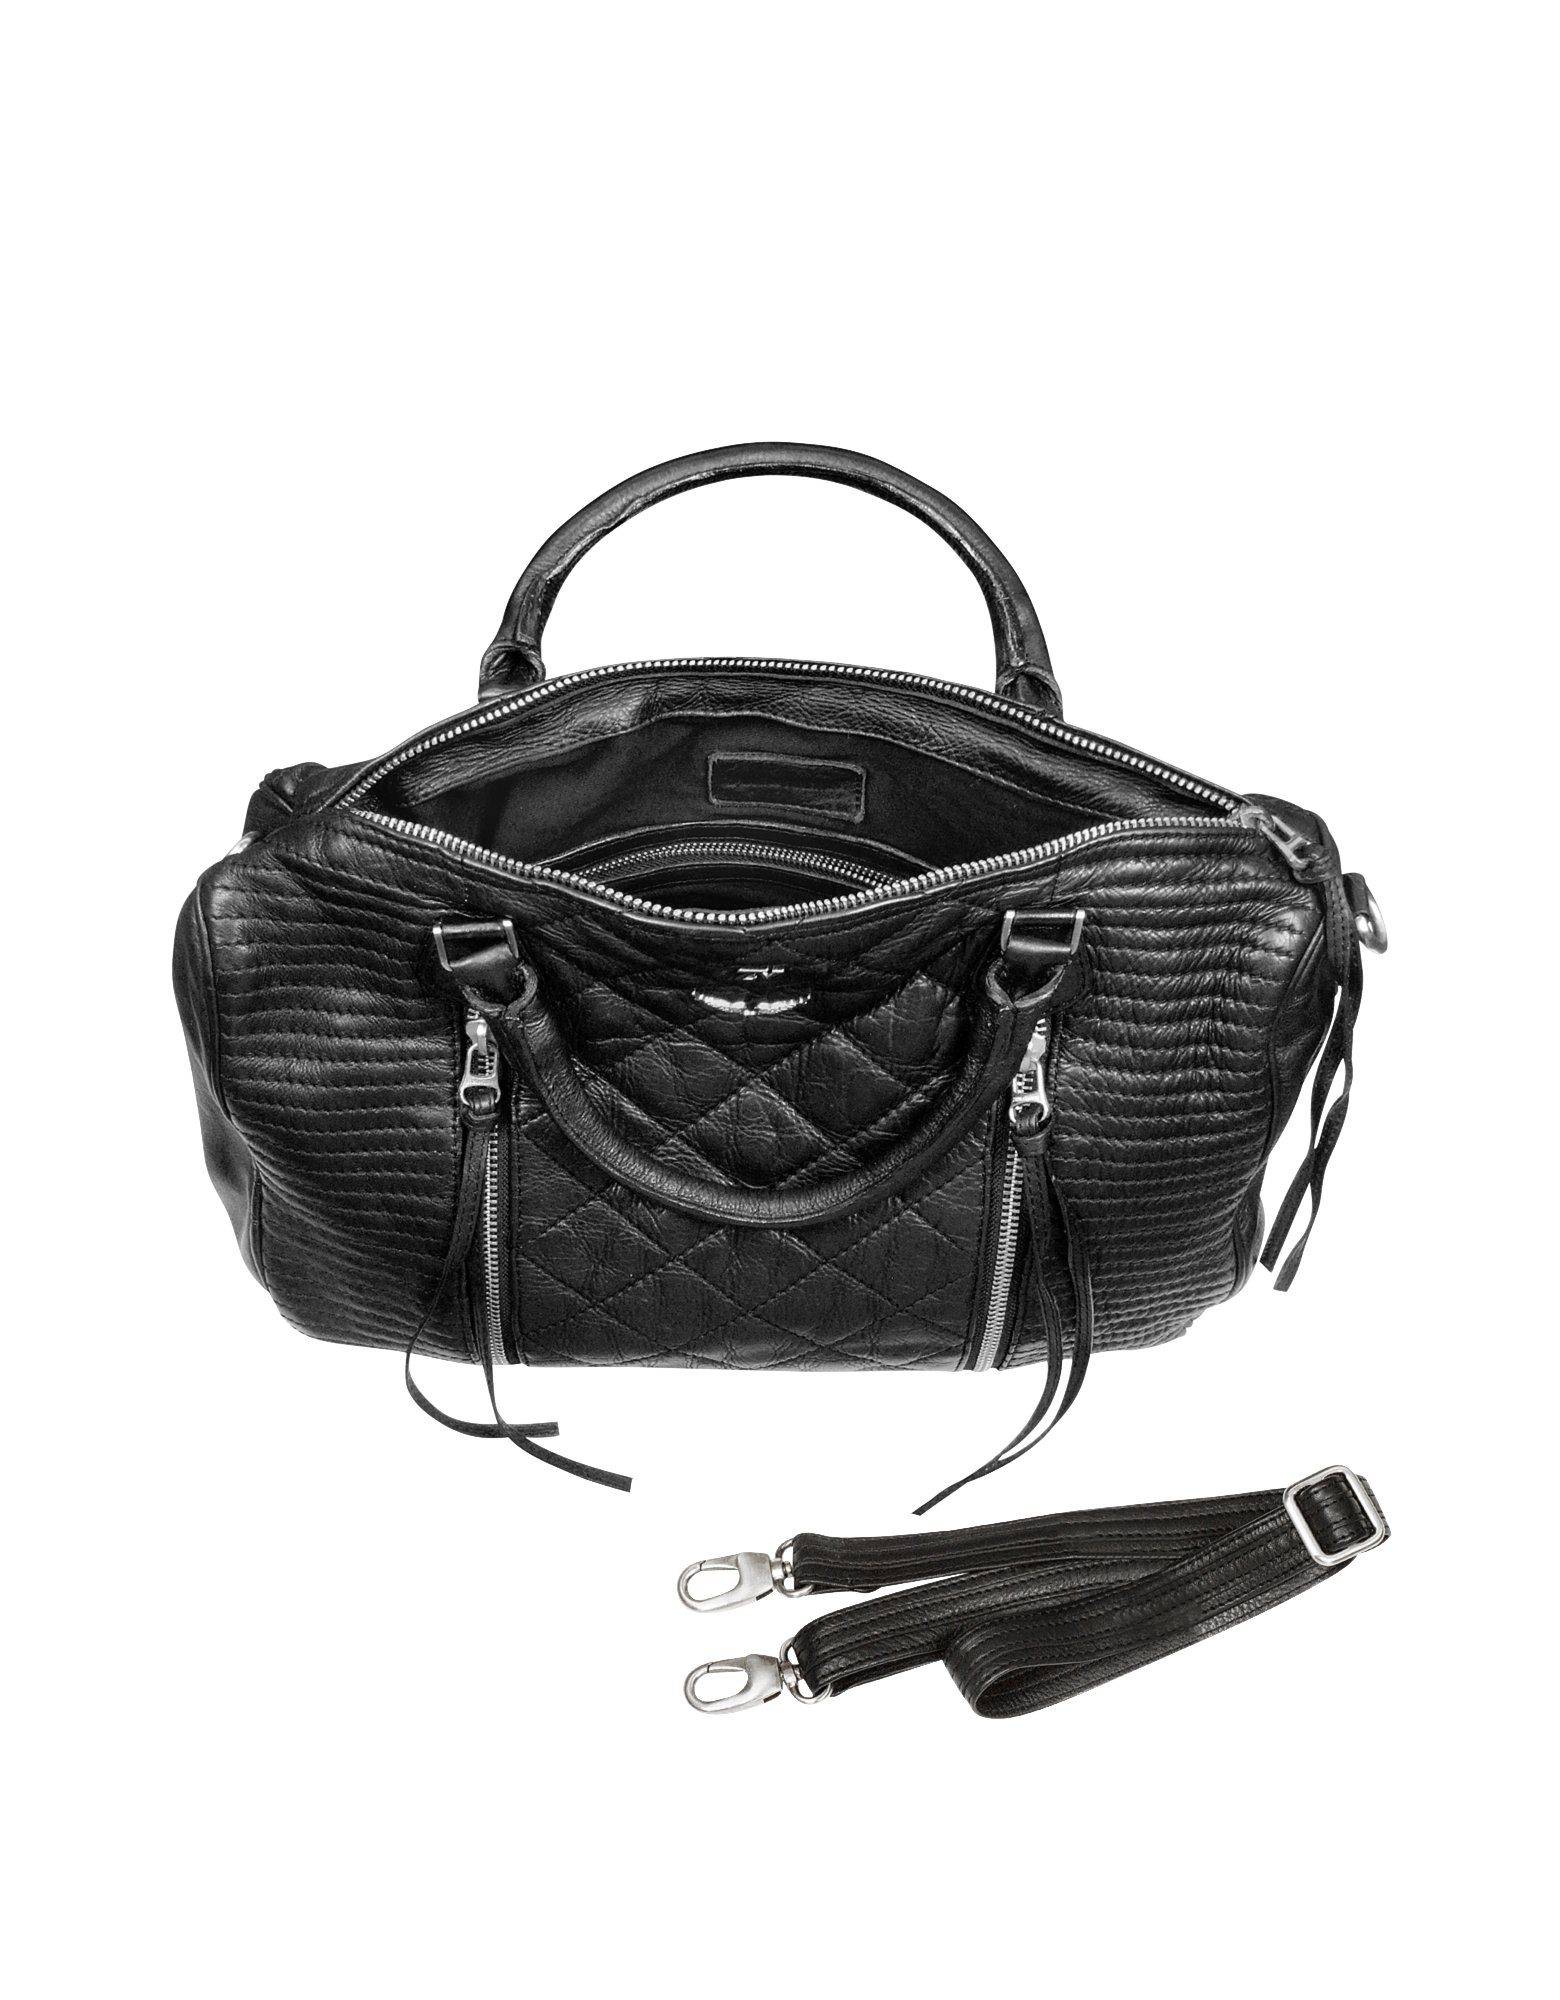 Zadig & Voltaire Sunny Large Quilted Leather Satchel in Black - Lyst